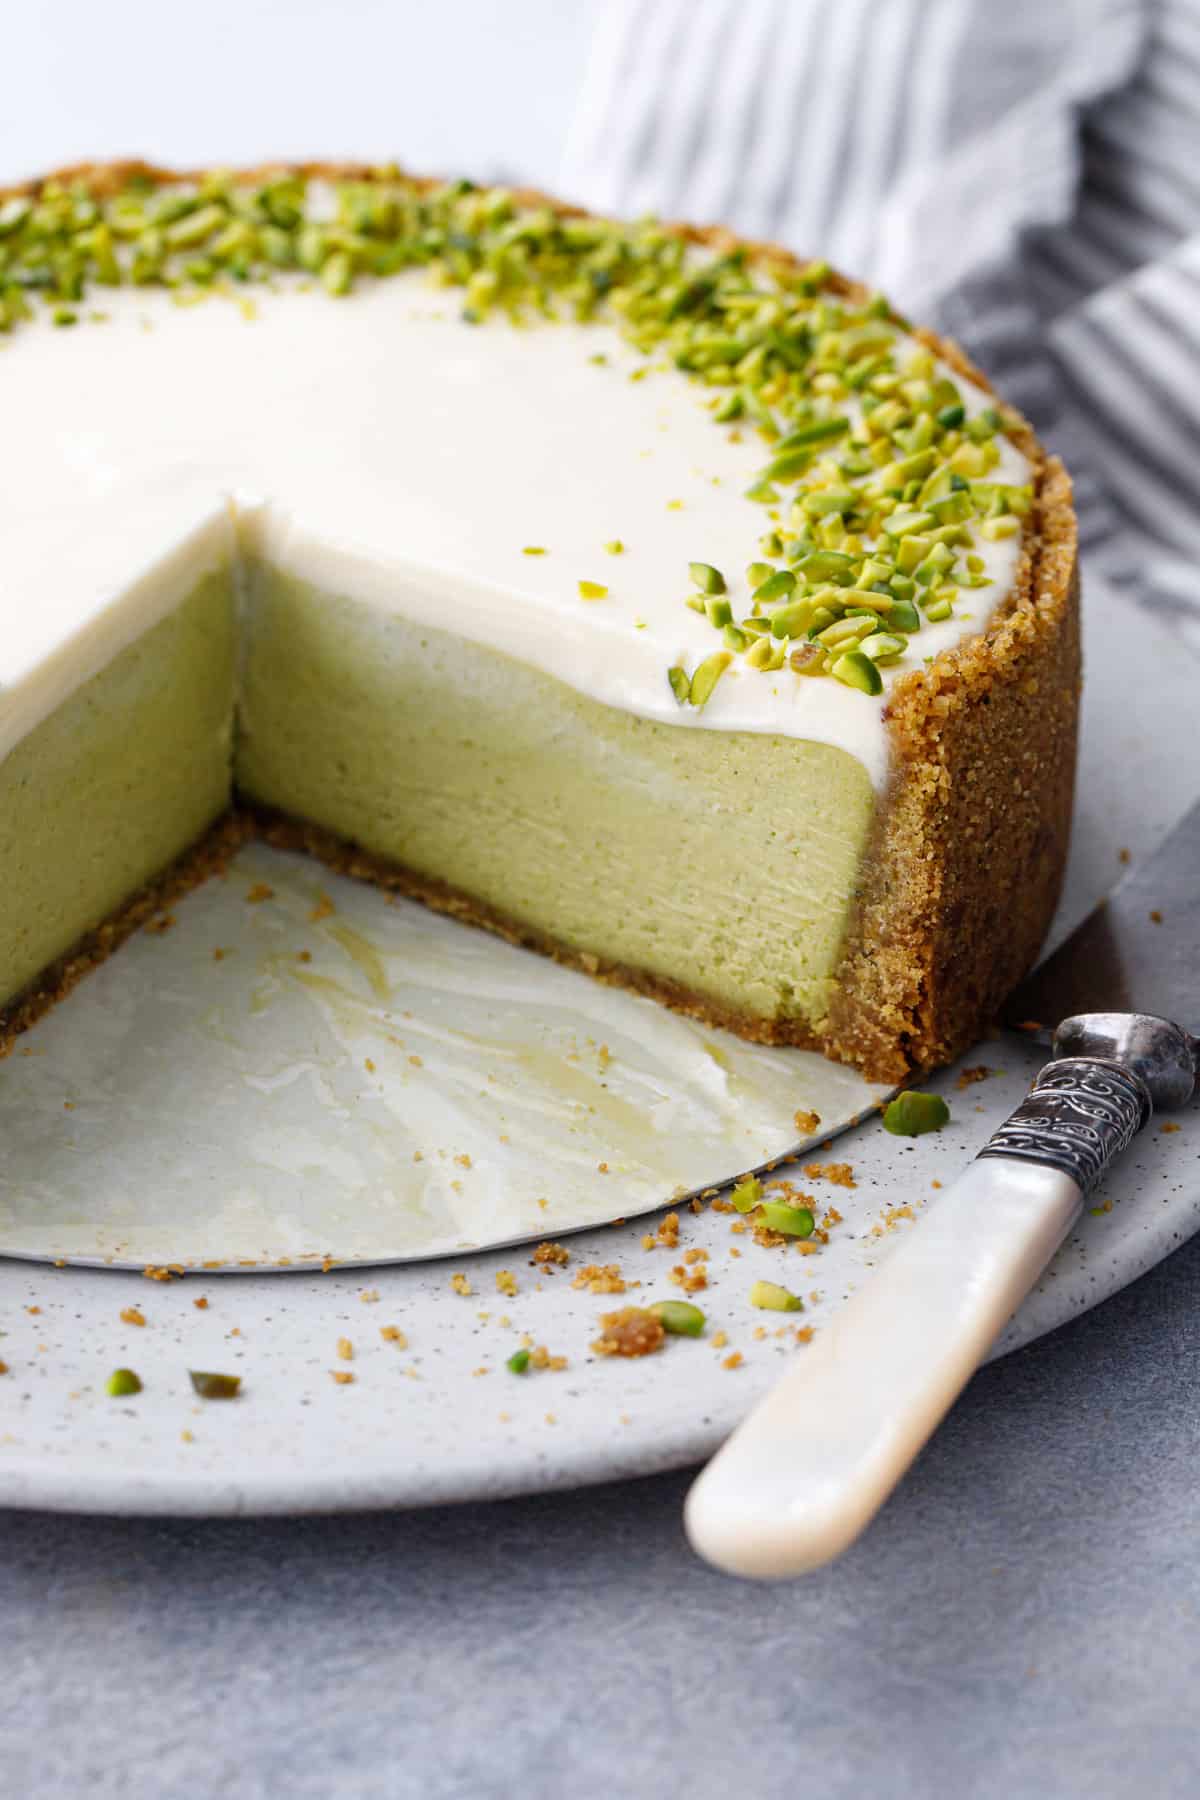 Cross section with slices cut out of a Pistachio Sour Cream Cheesecake showing the distinct layers of green pistachio filling and sour cream topping.